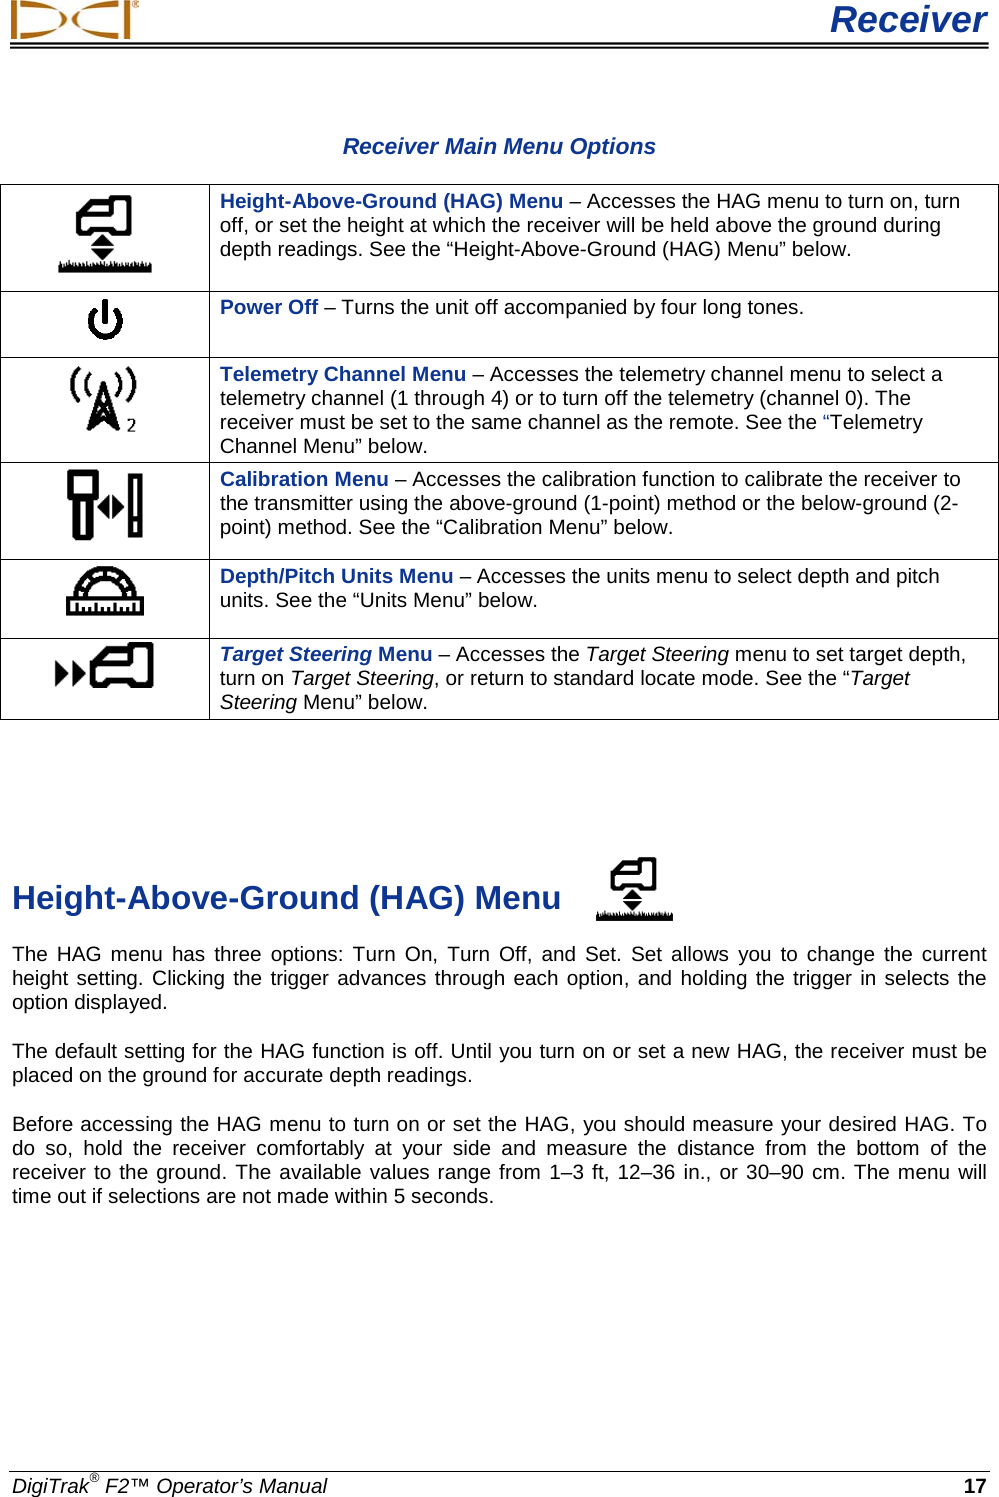  Receiver DigiTrak® F2™ Operator’s Manual 17 Receiver Main Menu Options  Height-Above-Ground (HAG) Menu – Accesses the HAG menu to turn on, turn off, or set the height at which the receiver will be held above the ground during depth readings. See the “Height-Above-Ground (HAG) Menu” below.  Power Off – Turns the unit off accompanied by four long tones.   Telemetry Channel Menu – Accesses the telemetry channel menu to select a telemetry channel (1 through 4) or to turn off the telemetry (channel 0). The receiver must be set to the same channel as the remote. See the “Telemetry Channel Menu” below.  Calibration Menu – Accesses the calibration function to calibrate the receiver to the transmitter using the above-ground (1-point) method or the below-ground (2-point) method. See the “Calibration Menu” below.  Depth/Pitch Units Menu – Accesses the units menu to select depth and pitch units. See the “Units Menu” below.  Target Steering Menu – Accesses the Target Steering menu to set target depth, turn on Target Steering, or return to standard locate mode. See the “Target Steering Menu” below.    Height-Above-Ground (HAG) Menu The HAG menu has three options: Turn  On, Turn Off, and Set.  Set allows you to change the current height setting. Clicking the trigger advances through each option, and holding the trigger in selects the option displayed.  The default setting for the HAG function is off. Until you turn on or set a new HAG, the receiver must be placed on the ground for accurate depth readings. Before accessing the HAG menu to turn on or set the HAG, you should measure your desired HAG. To do so, hold the receiver comfortably at your side and measure the distance from the bottom of the receiver to the ground. The available values range from 1–3 ft, 12–36 in., or 30–90 cm. The menu will time out if selections are not made within 5 seconds. 